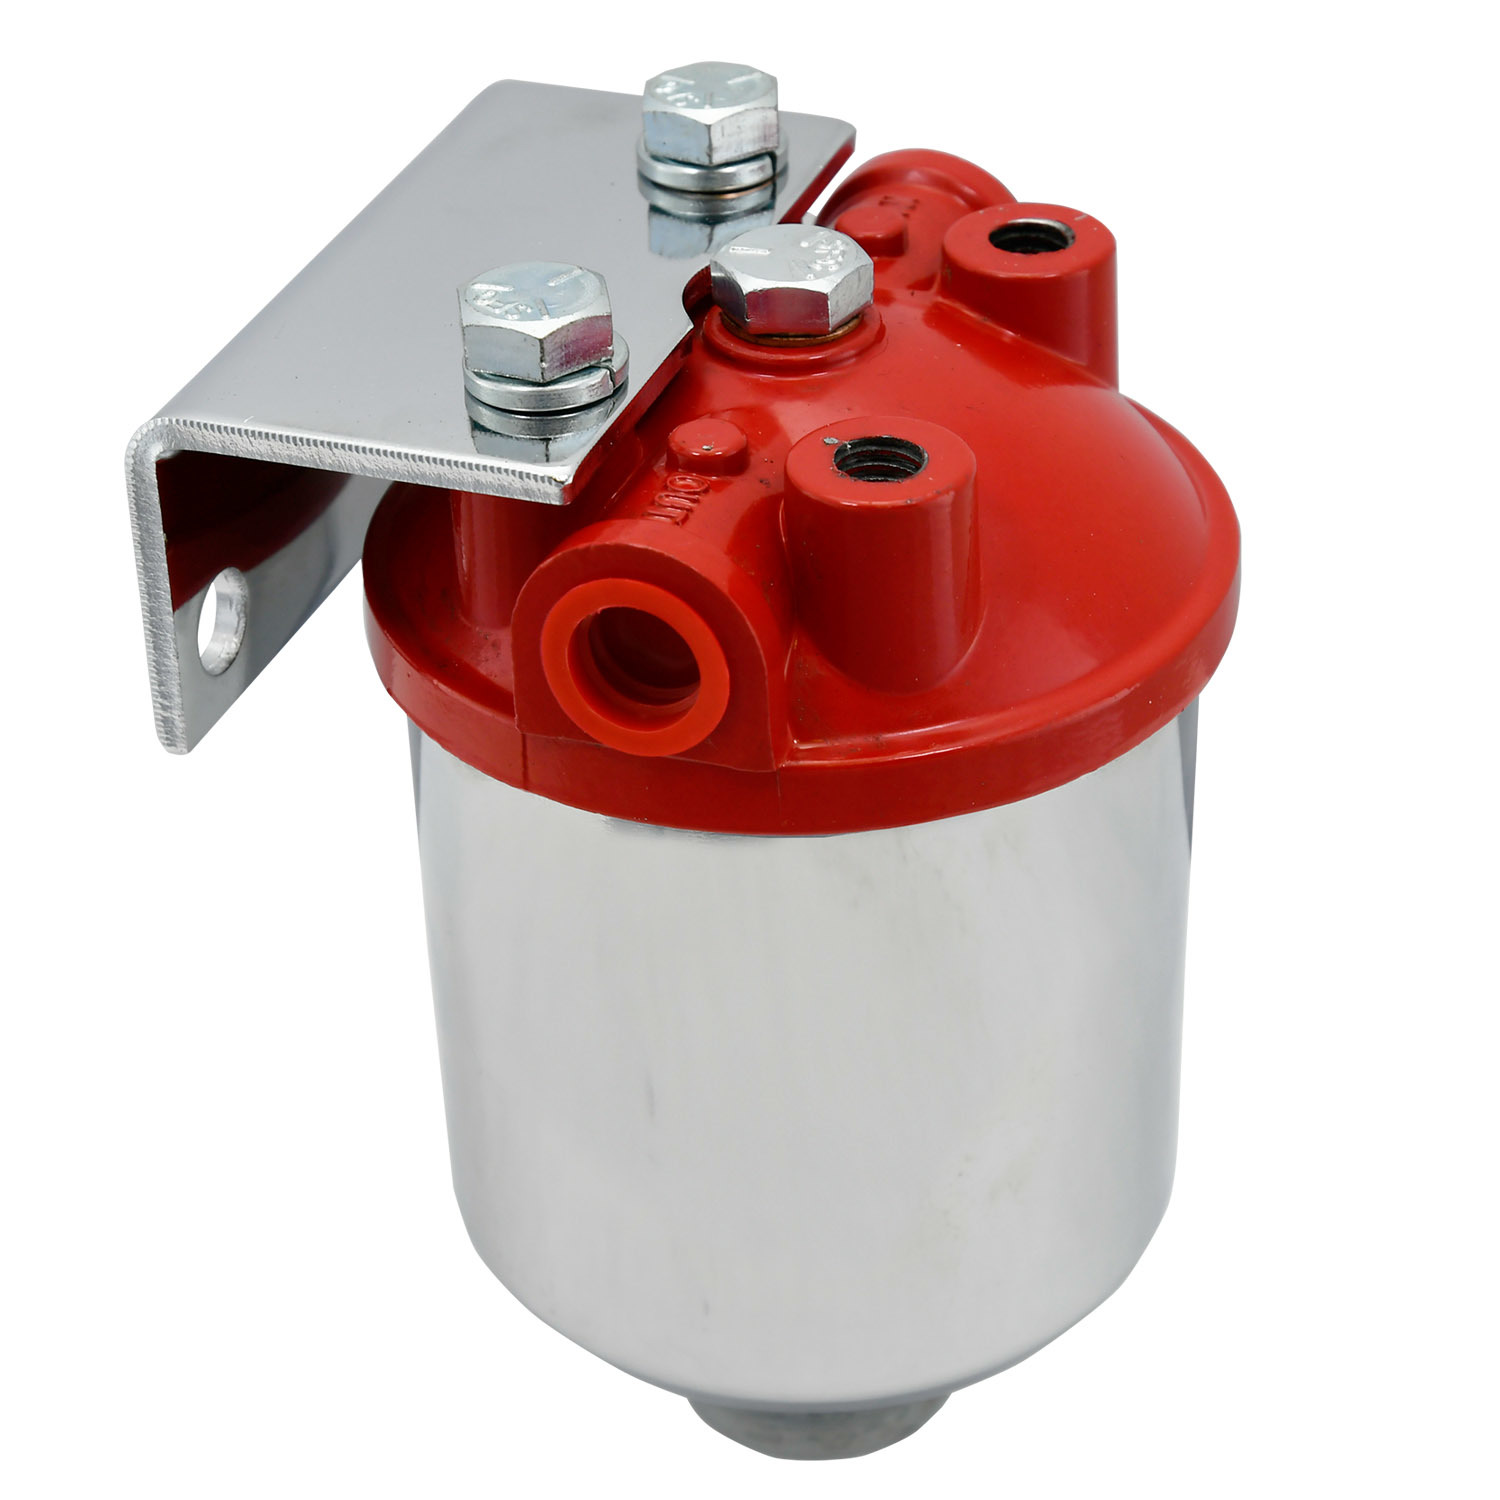 Specialty Products 2895 Fuel Filter, Canister, 10 Micron, Paper Element, 3/8 in NPT Female Inlet, 3/8 in NPT Female Outlet, Bracket, Aluminum / Steel, Red Paint / Chrome, Each